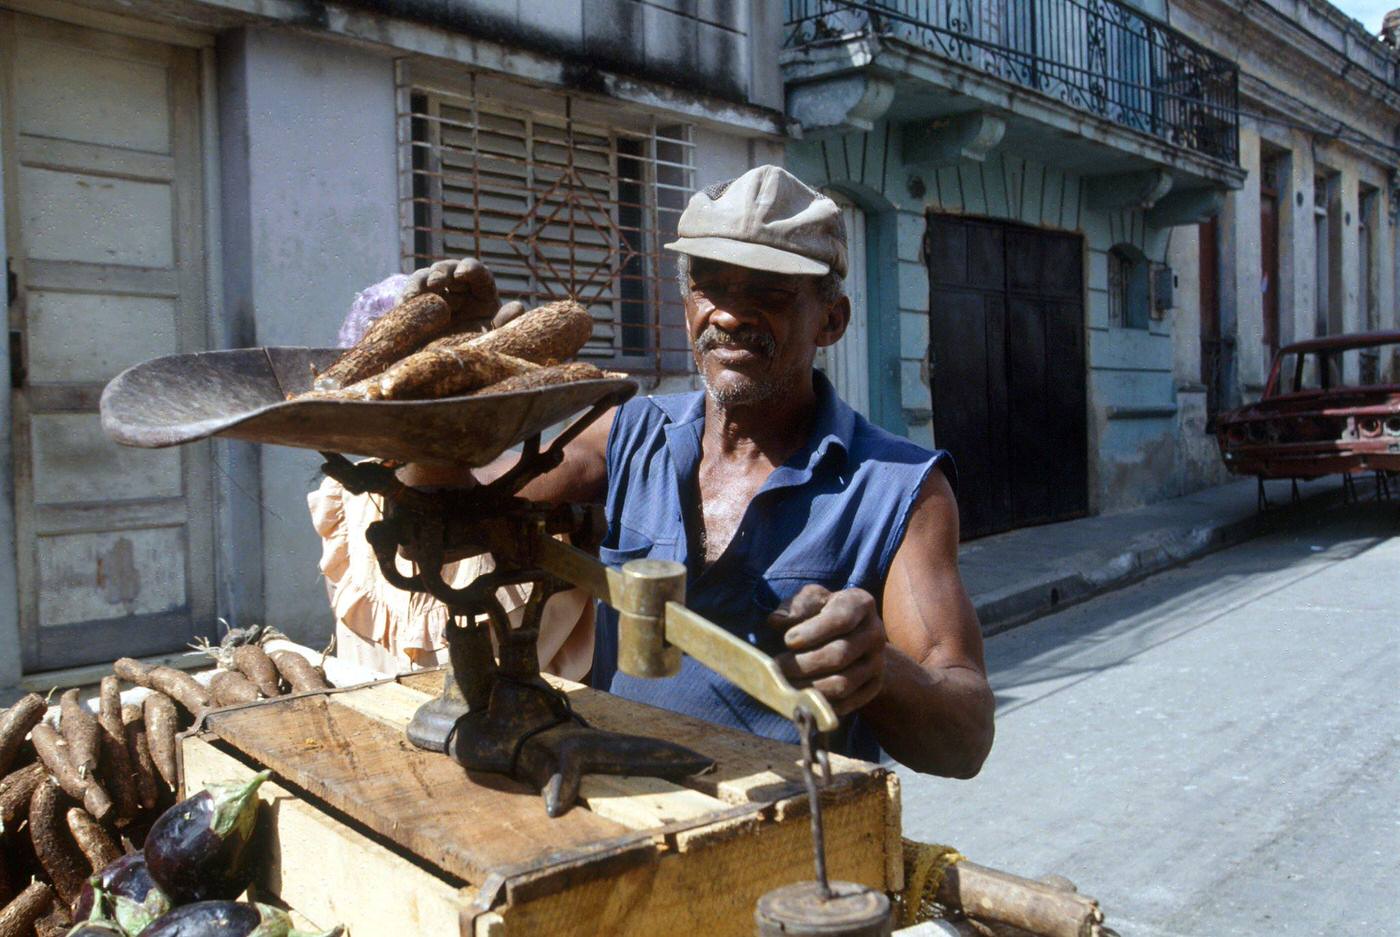 Cuban man weighing yucca to sell in the street on a scale, Cuba, 1990.